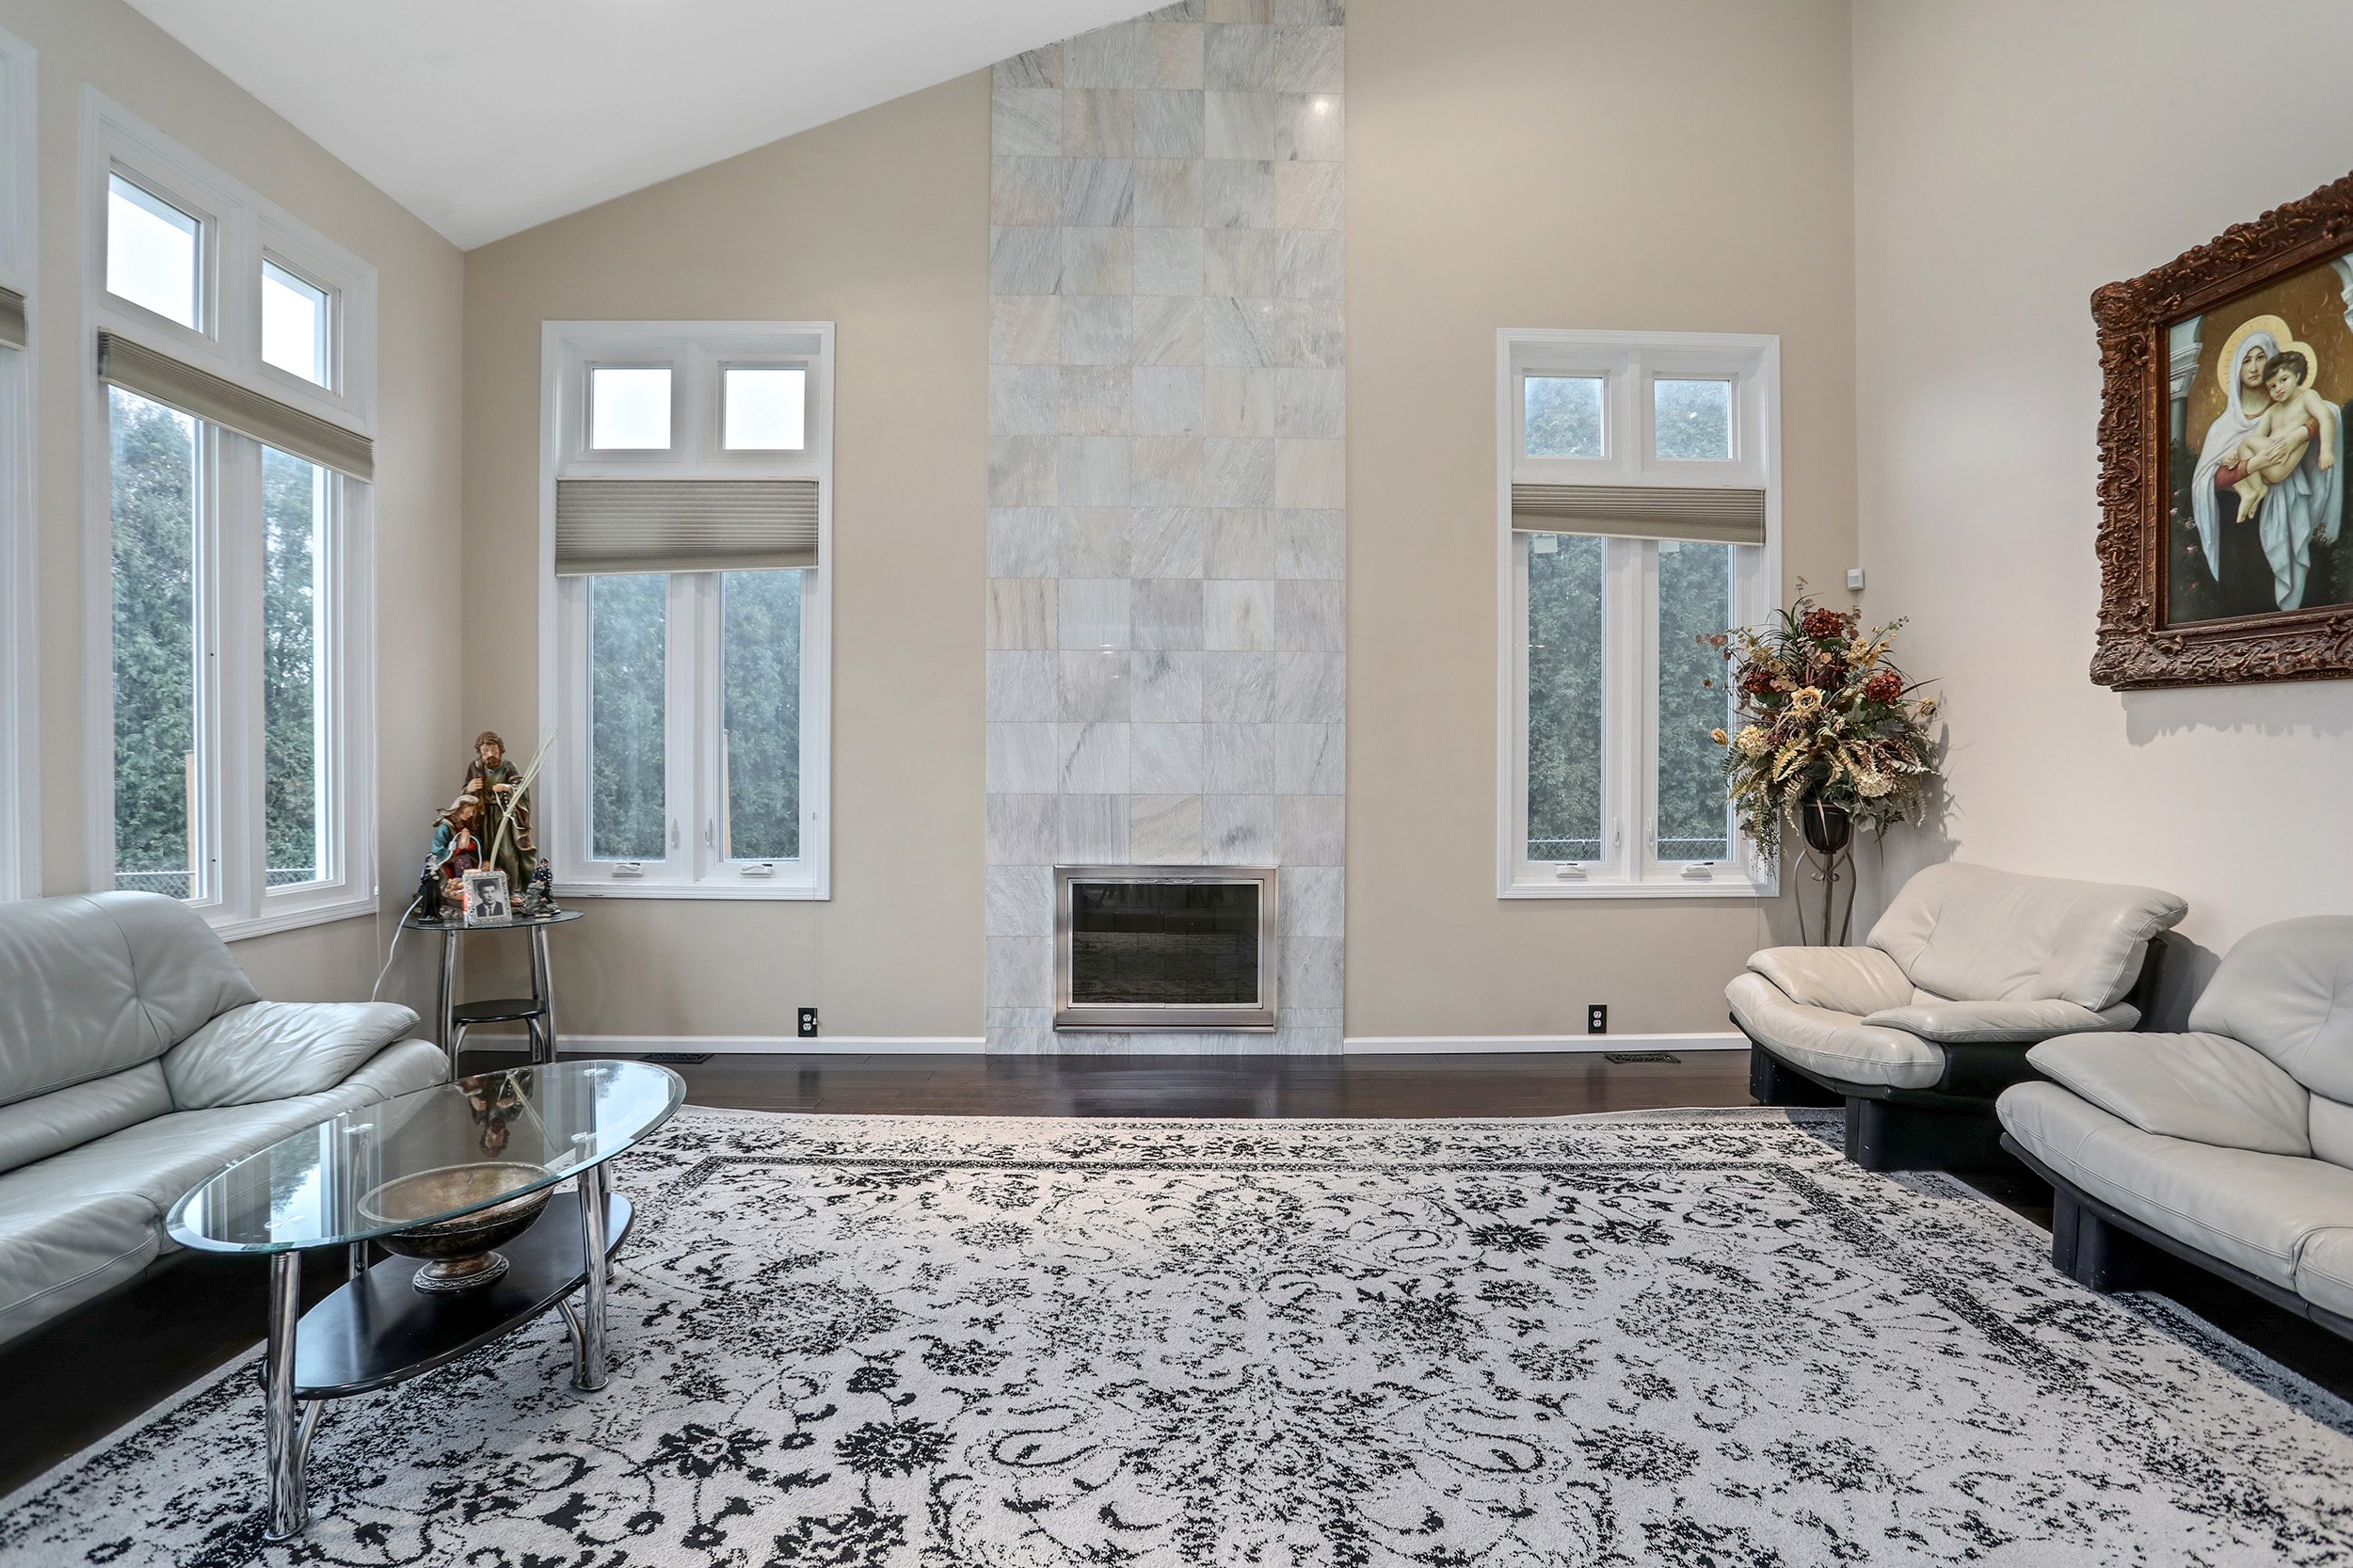  Sterling Heights Real Estate Photography - modern living room with soaring fireplace 